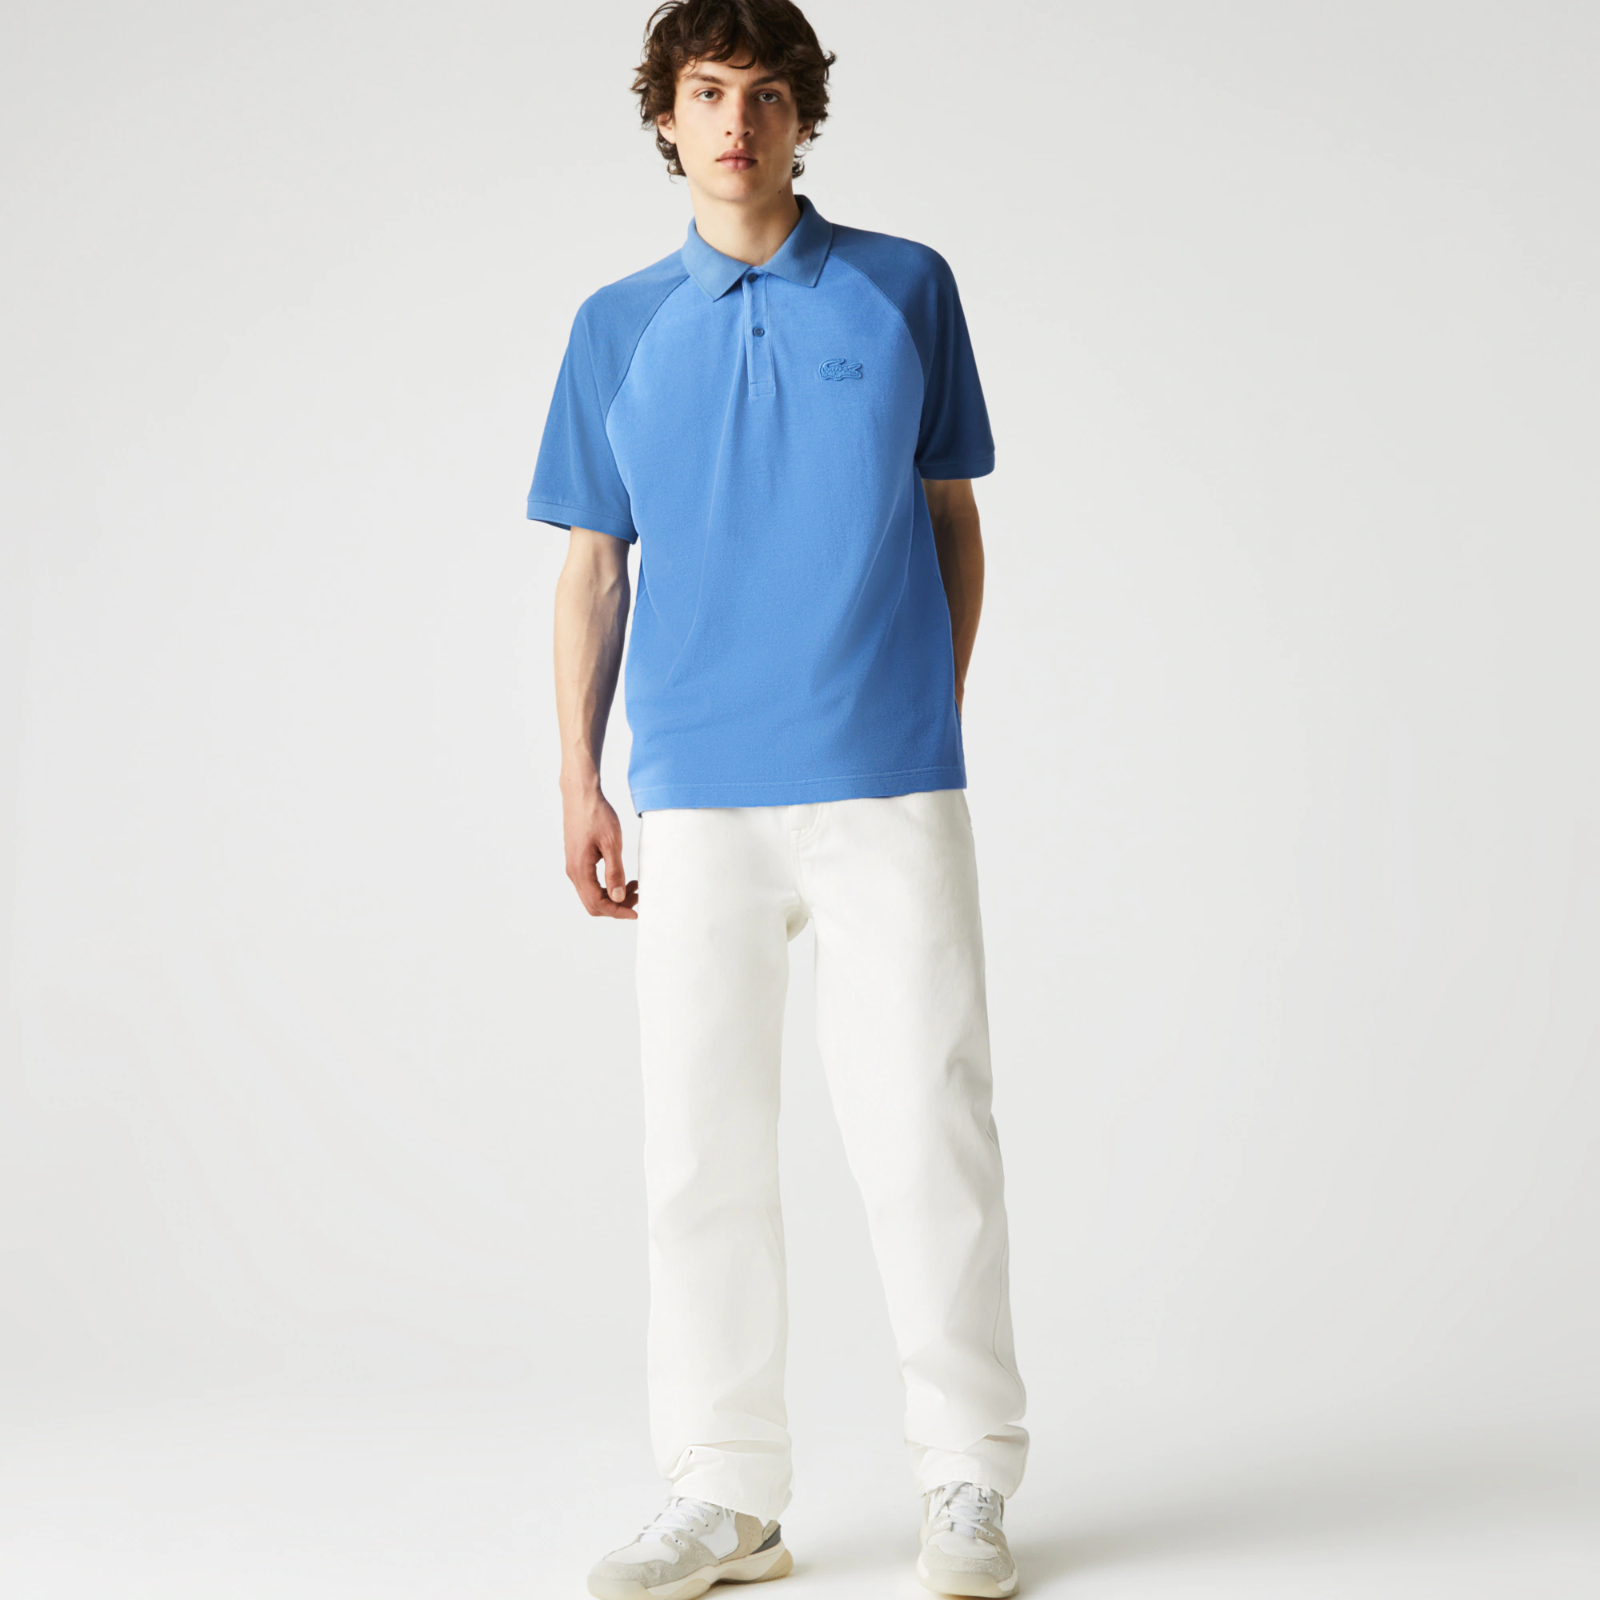 Men’s Lacoste Regular Fit Contrast Sleeved Stretch Cotton Polo Shirt PH9745-51